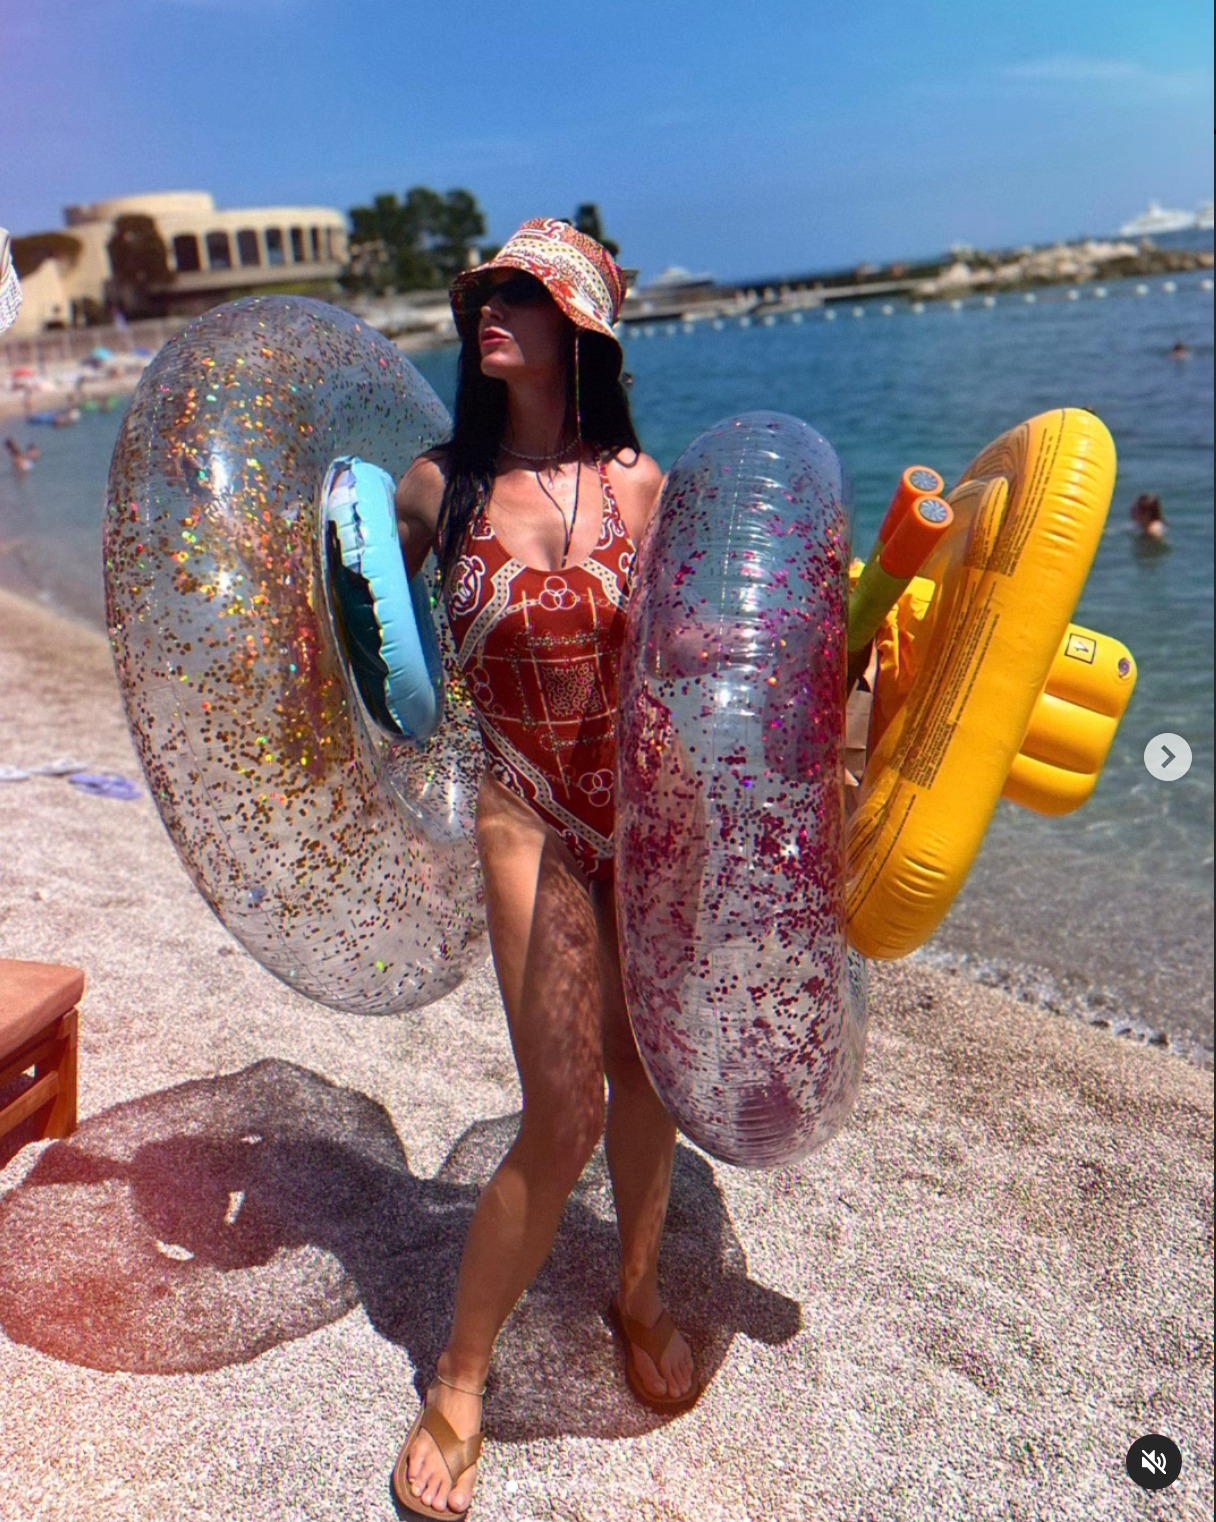 Katy Perry sporting a swimsuit on the beach during a family getaway